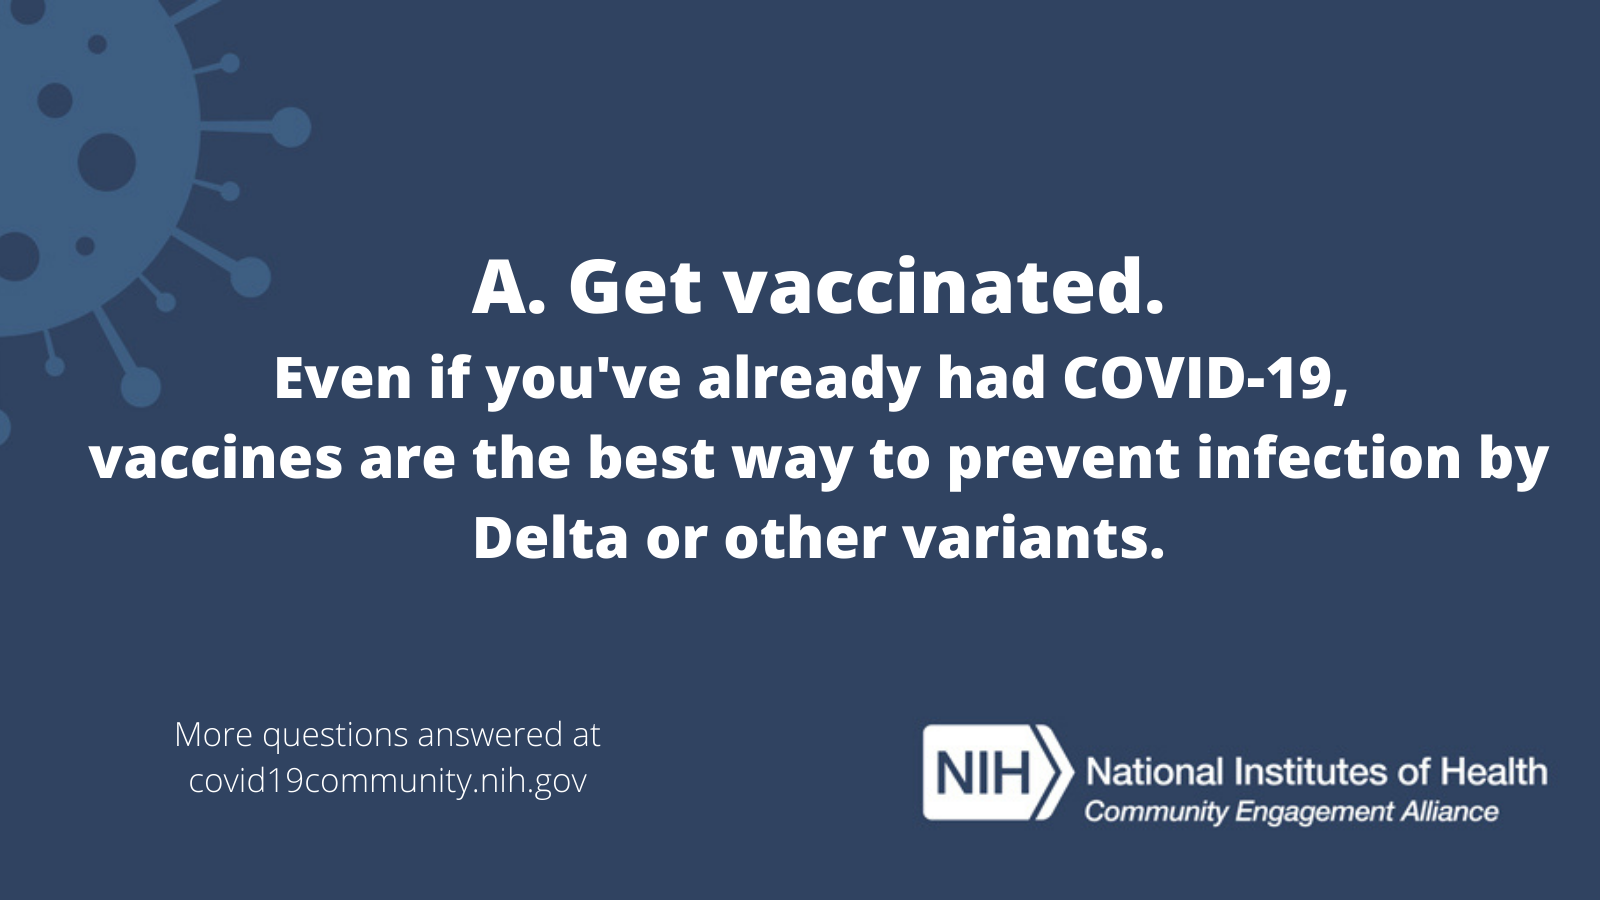 A. Get vaccinated. Even if you've already had COVID-19, vaccines are the best way to prevent infection by Delta or other variants. More vaccine questions answered at covid19community.nih.gov